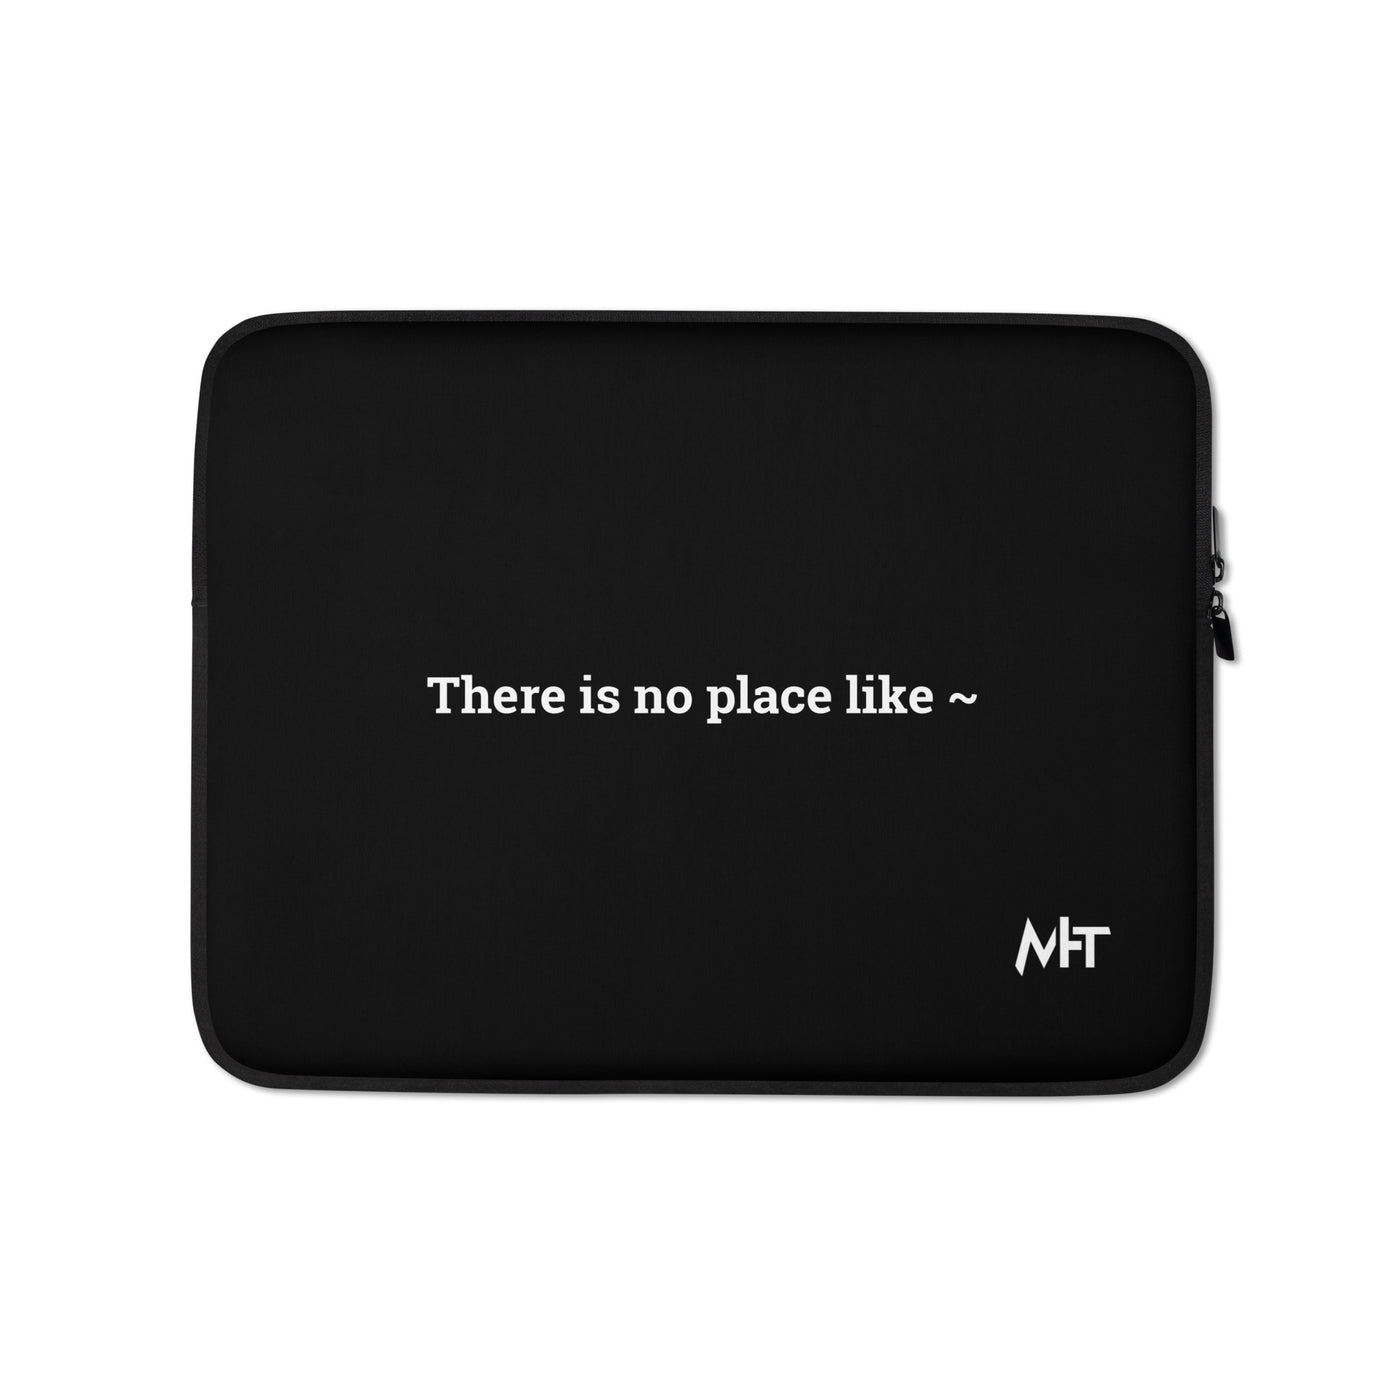 There is no Place like ~ - Laptop Sleeve